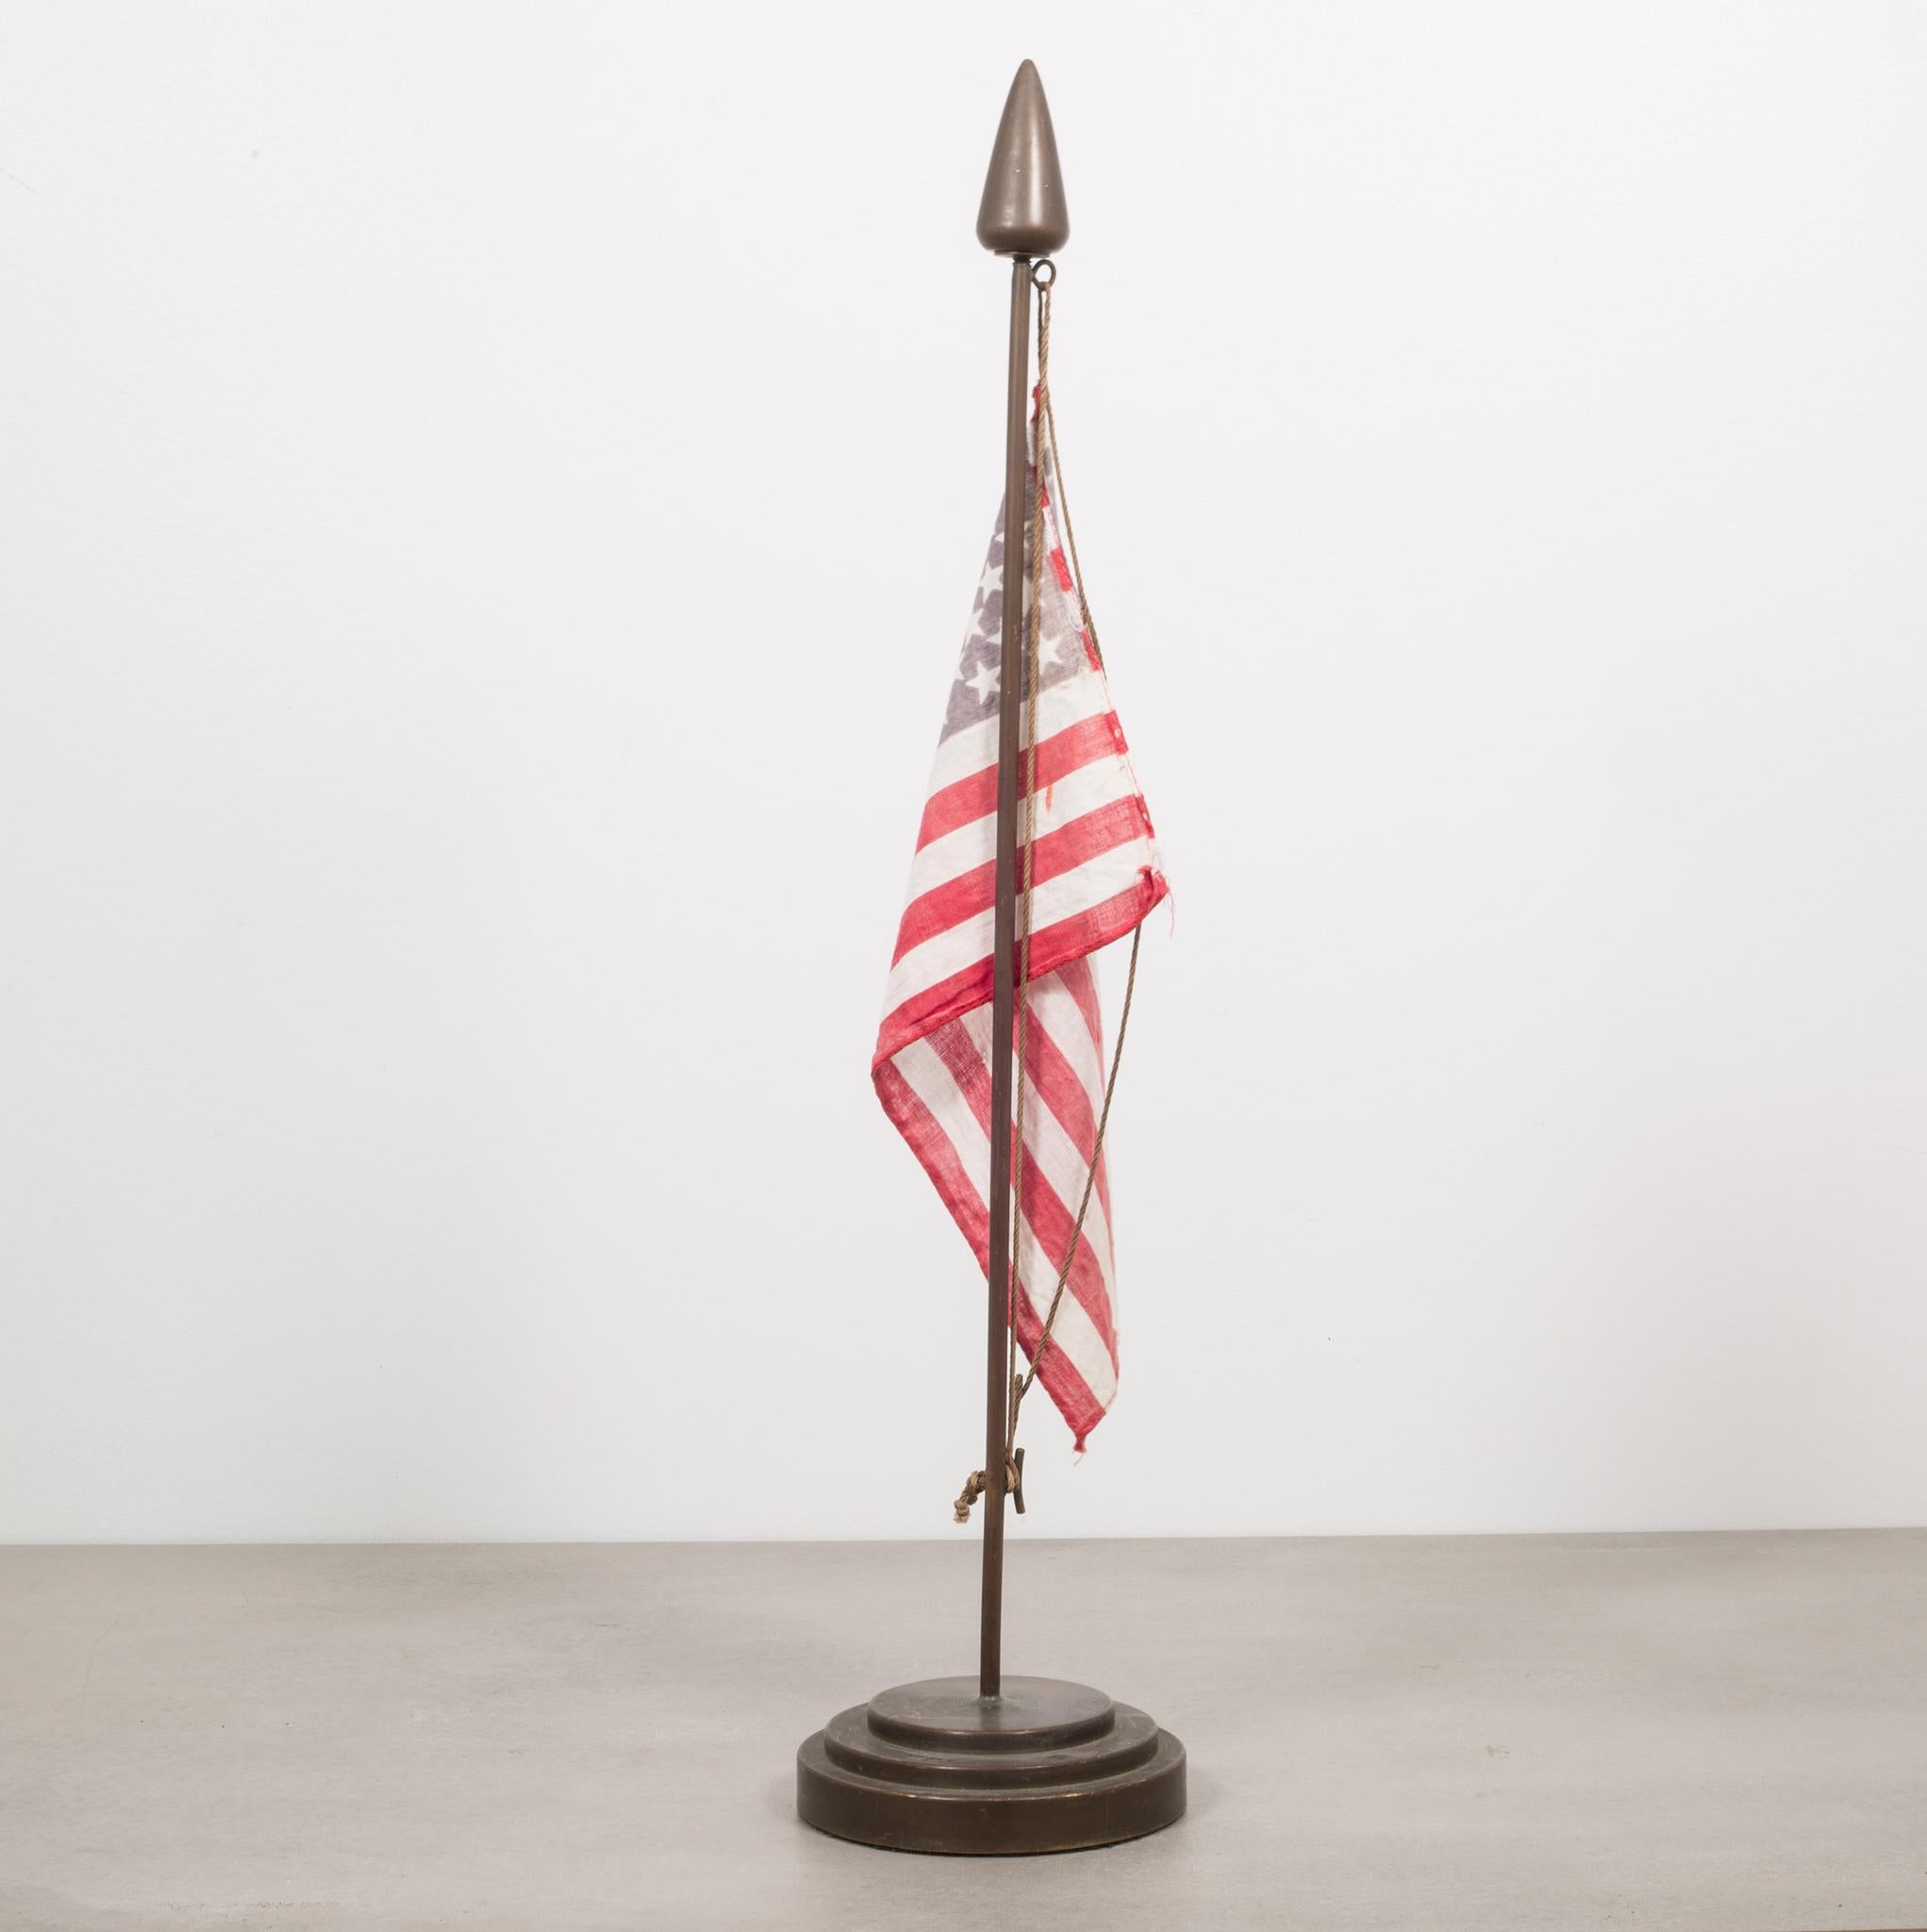 About

This is an original heavy bronze flag stand with an American flag. This piece was designed for a large boat or military ship to stay stationary on a desk while at sea. The bronze stand has a round, graduated step base with green velvet. The